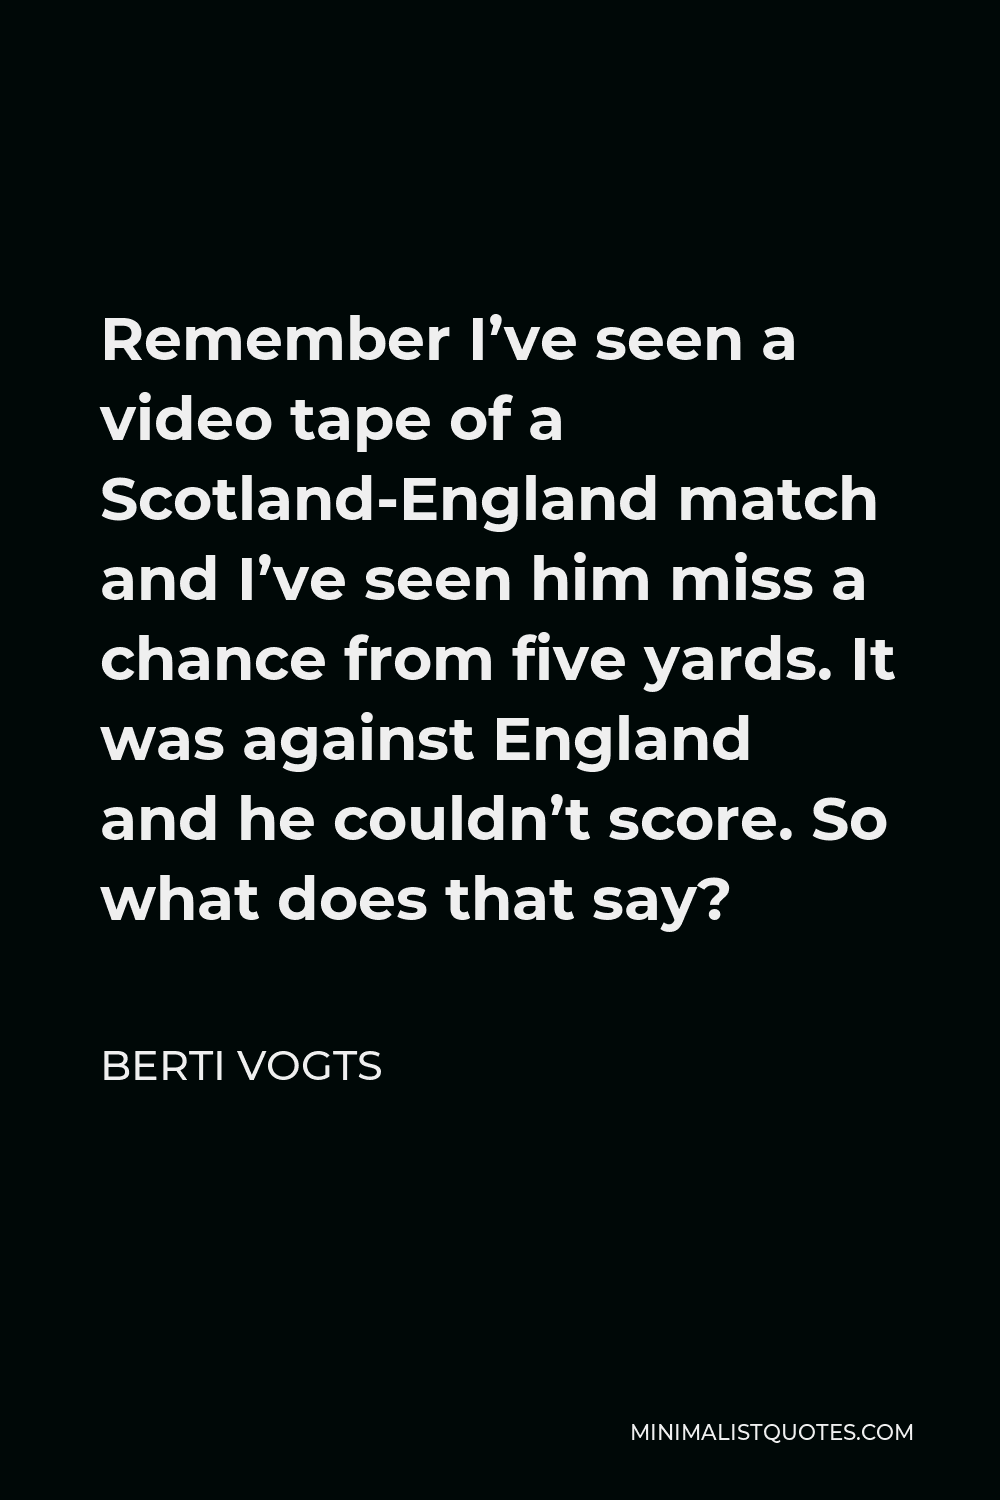 Berti Vogts Quote - Remember I’ve seen a video tape of a Scotland-England match and I’ve seen him miss a chance from five yards. It was against England and he couldn’t score. So what does that say?